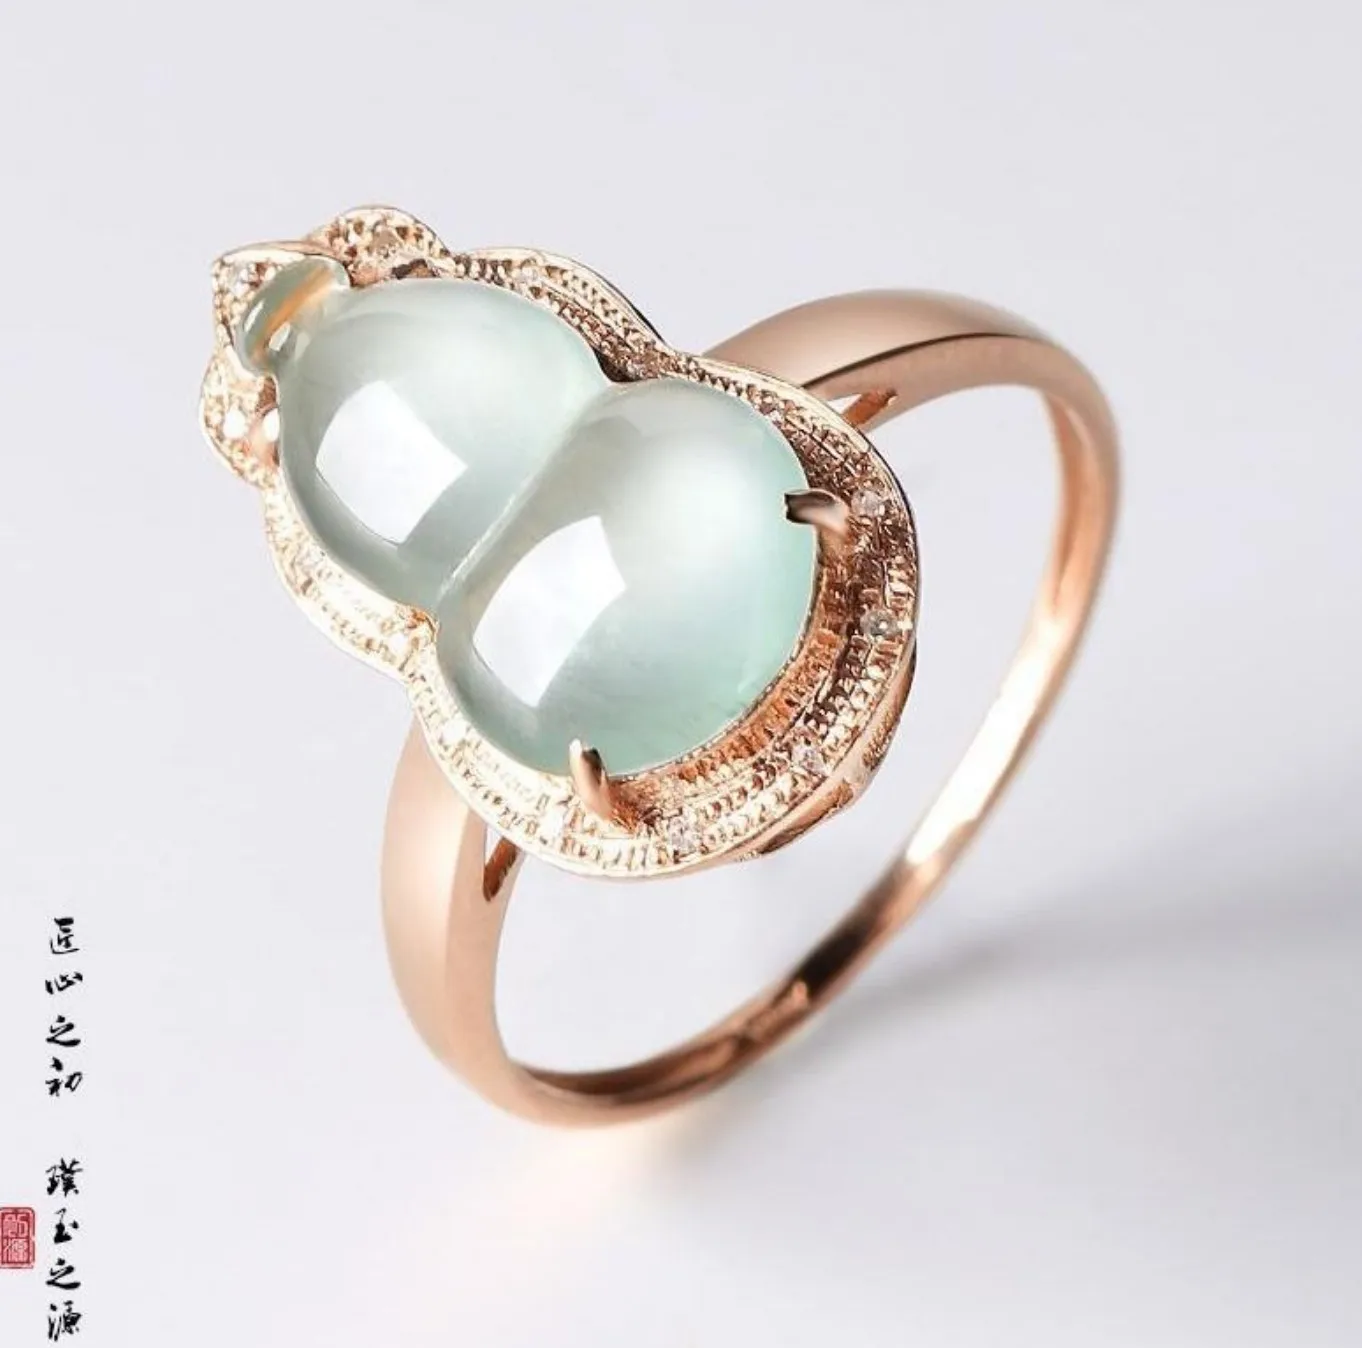 

Gold Flash Beauty S925 Sterling Silver Inlaid Ice-like Chalcedony Gourd Ring Open Mouth Bringing Good Luck and Wealth Open Ring